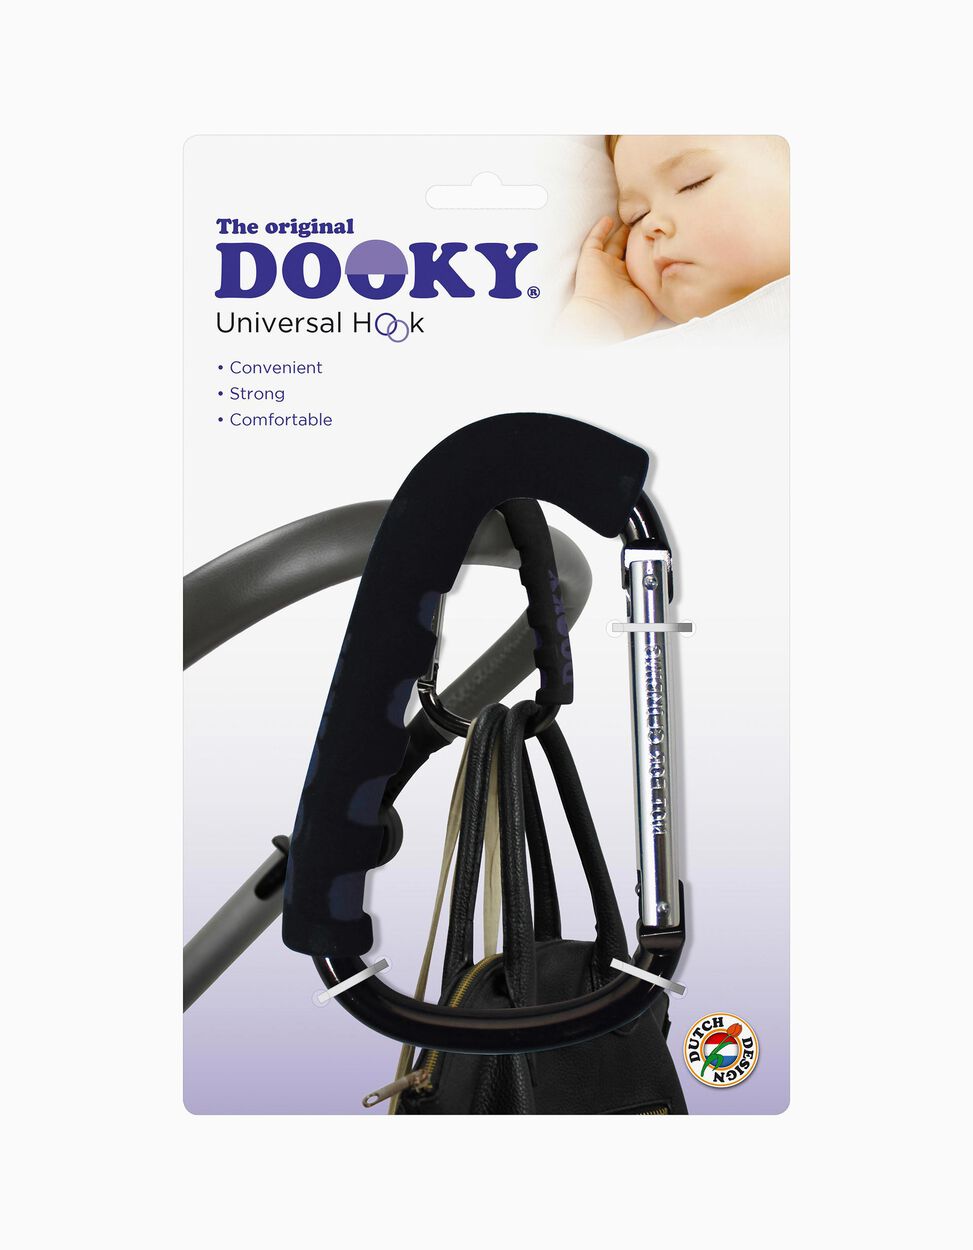 Universal Snap Hook by Dooky